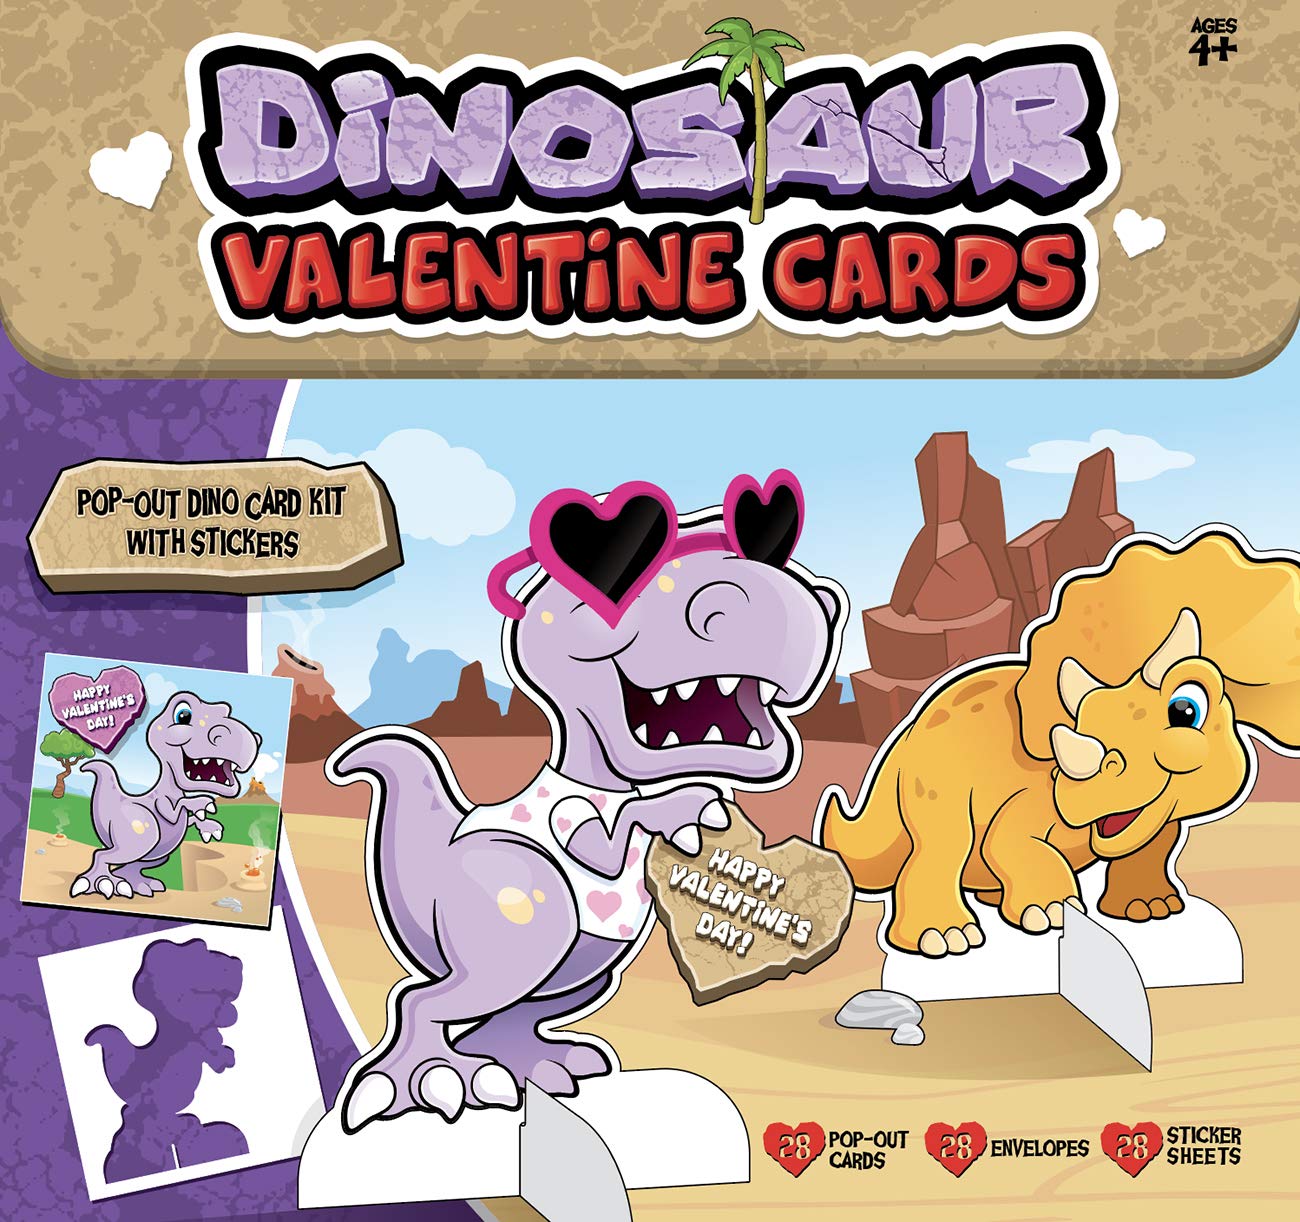 Book Cover Red Robin Greetings; Kids Valentine's Cards; Dinosaur Valentines Day Cards For kids, 28 Pop-Out Kids Valentines Day Cards With Dino Stickers (28 Cards With Envelopes)